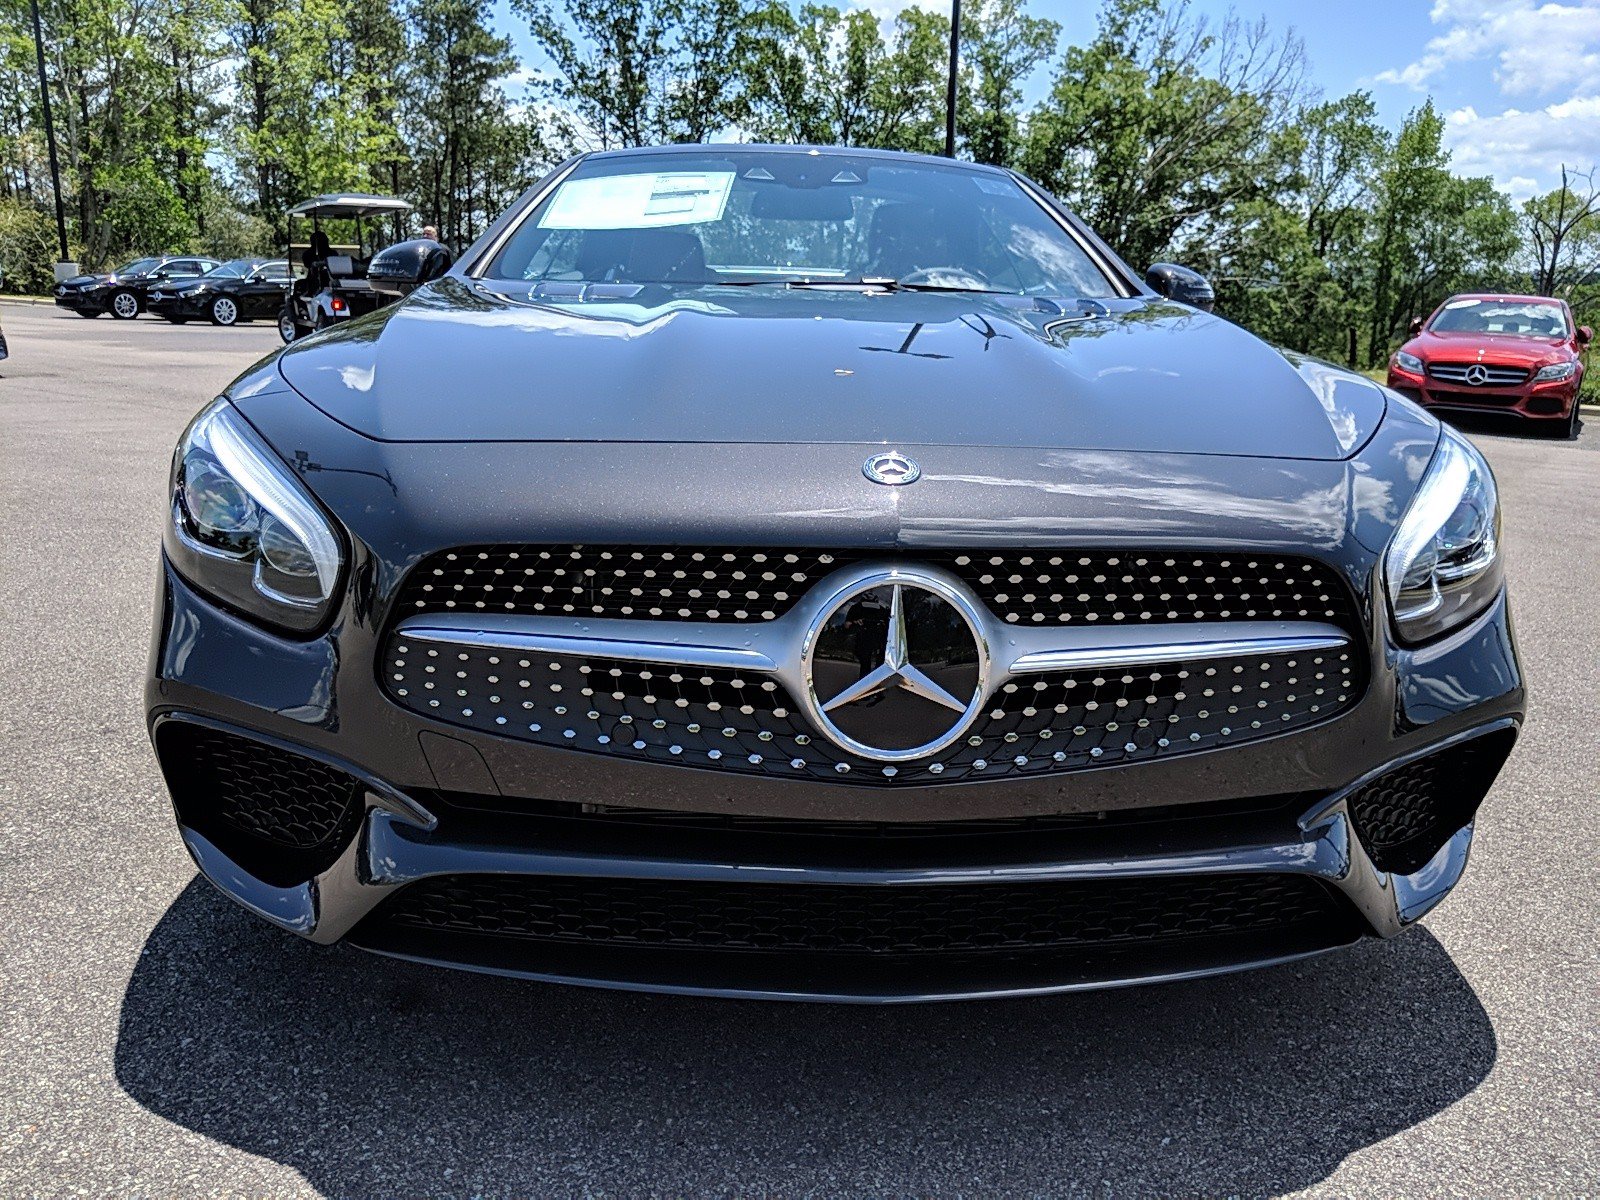 New 2020 Mercedes-Benz SL SL 550 Roadster in Irondale # ...